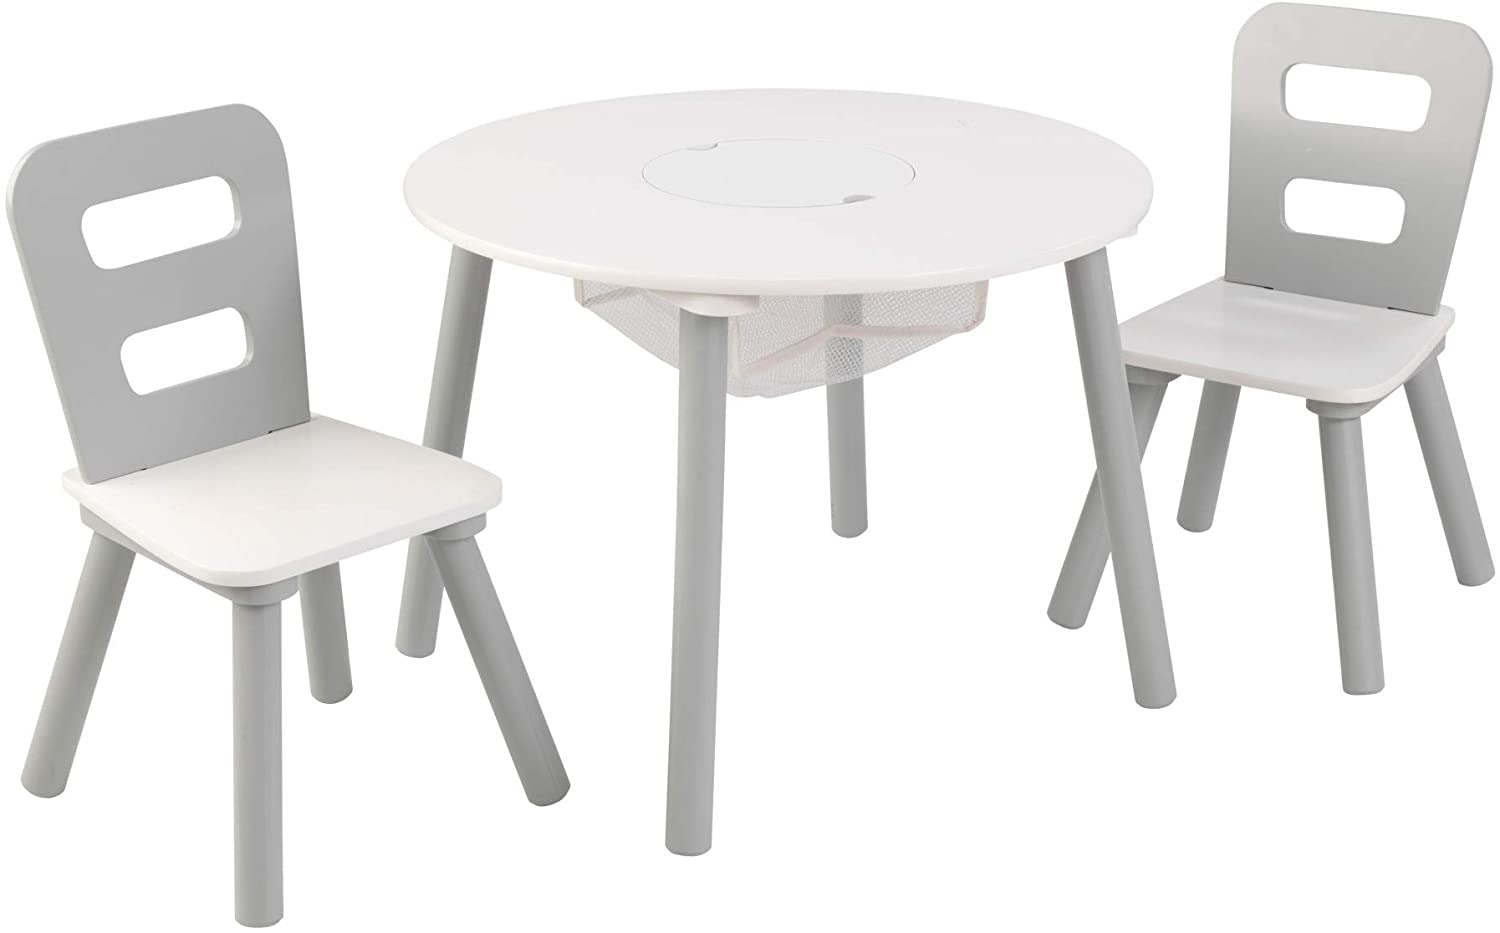 Stylish Round Table and Two Chair Set for Kids in Grey: A Space of Their Own